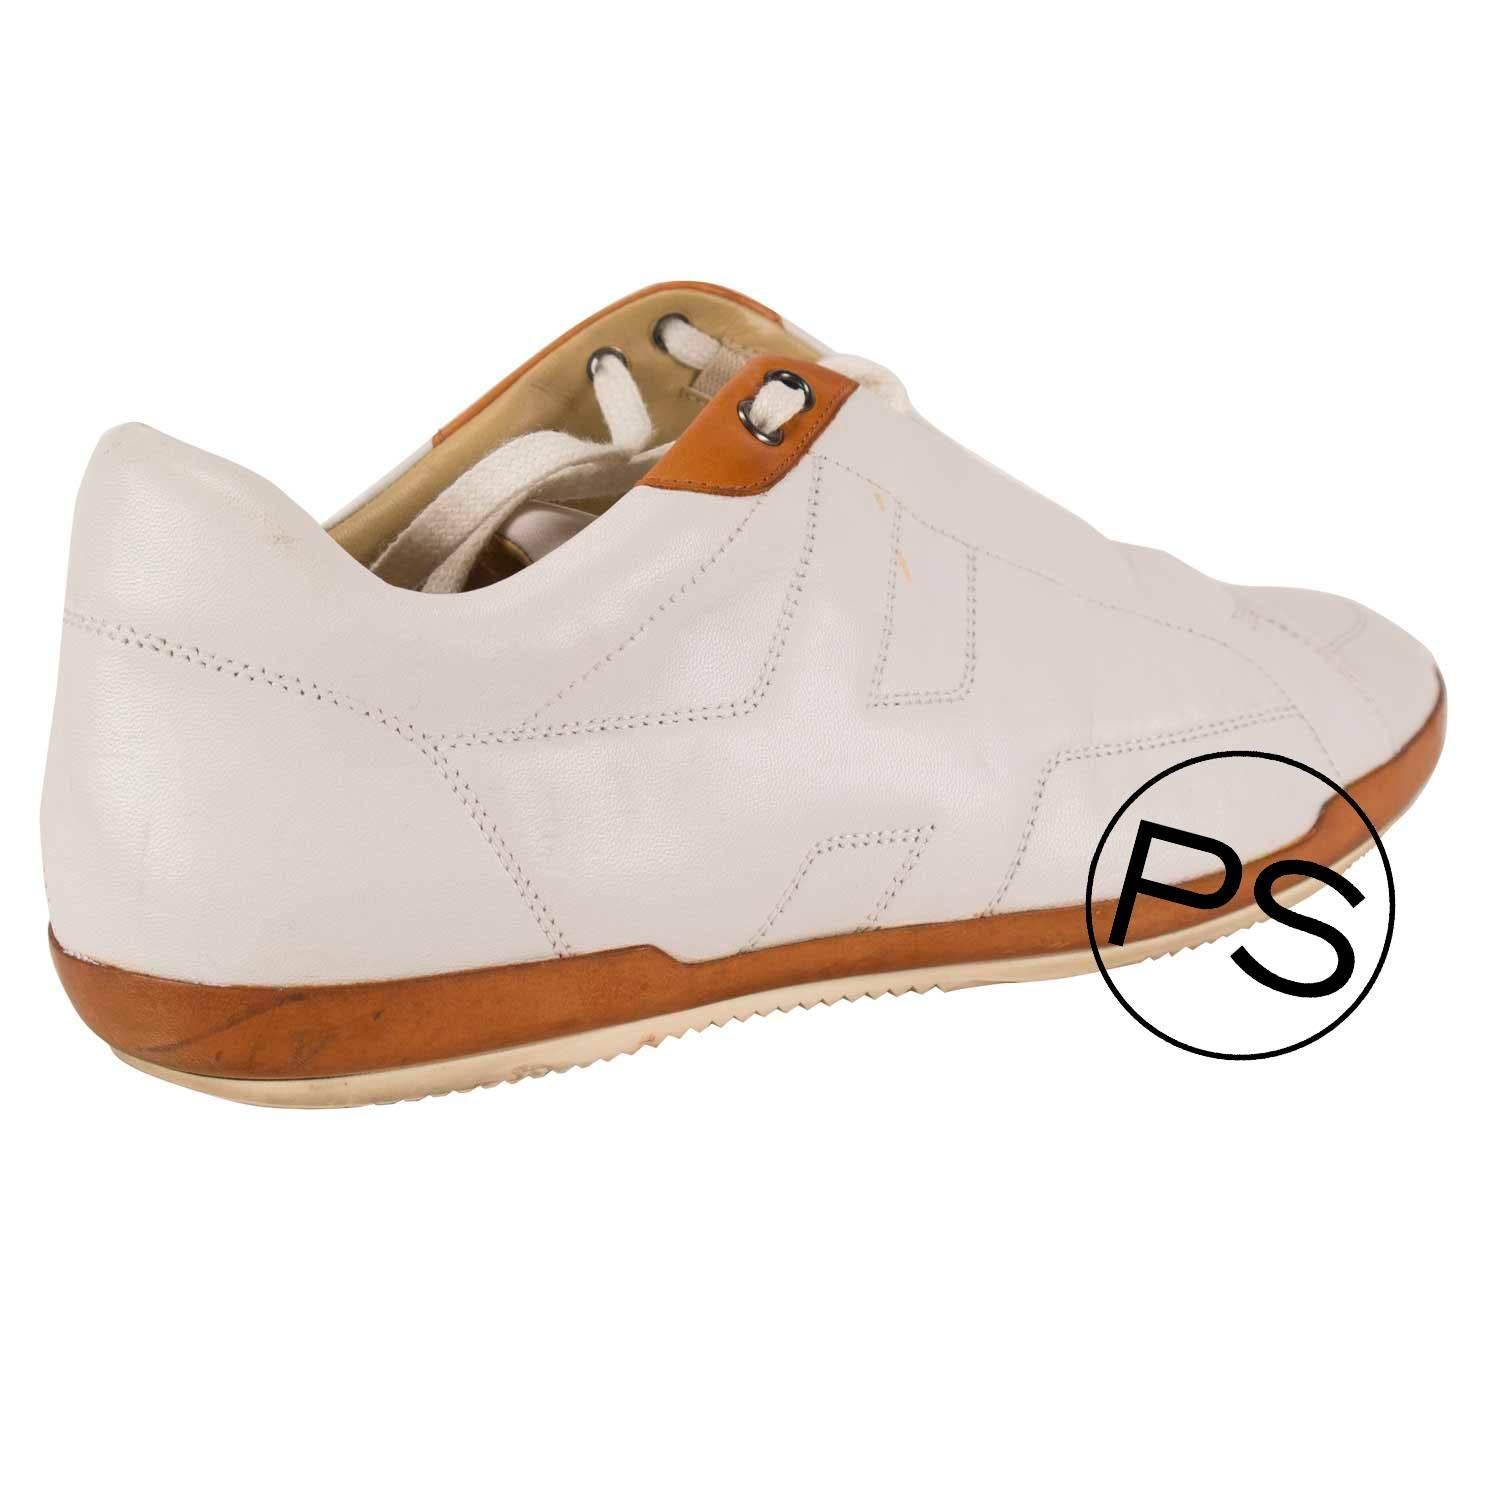 Hermes Sneakers White 2013

Pre-owned and used.

Bought it in Hermes store in 2013.

Composition: Soie

Model;Snakers

Size:41

Color; Blanc

-Shipment and Insurance, 100% Safe.

-Secure payment to the company. (bank transfer)

- 